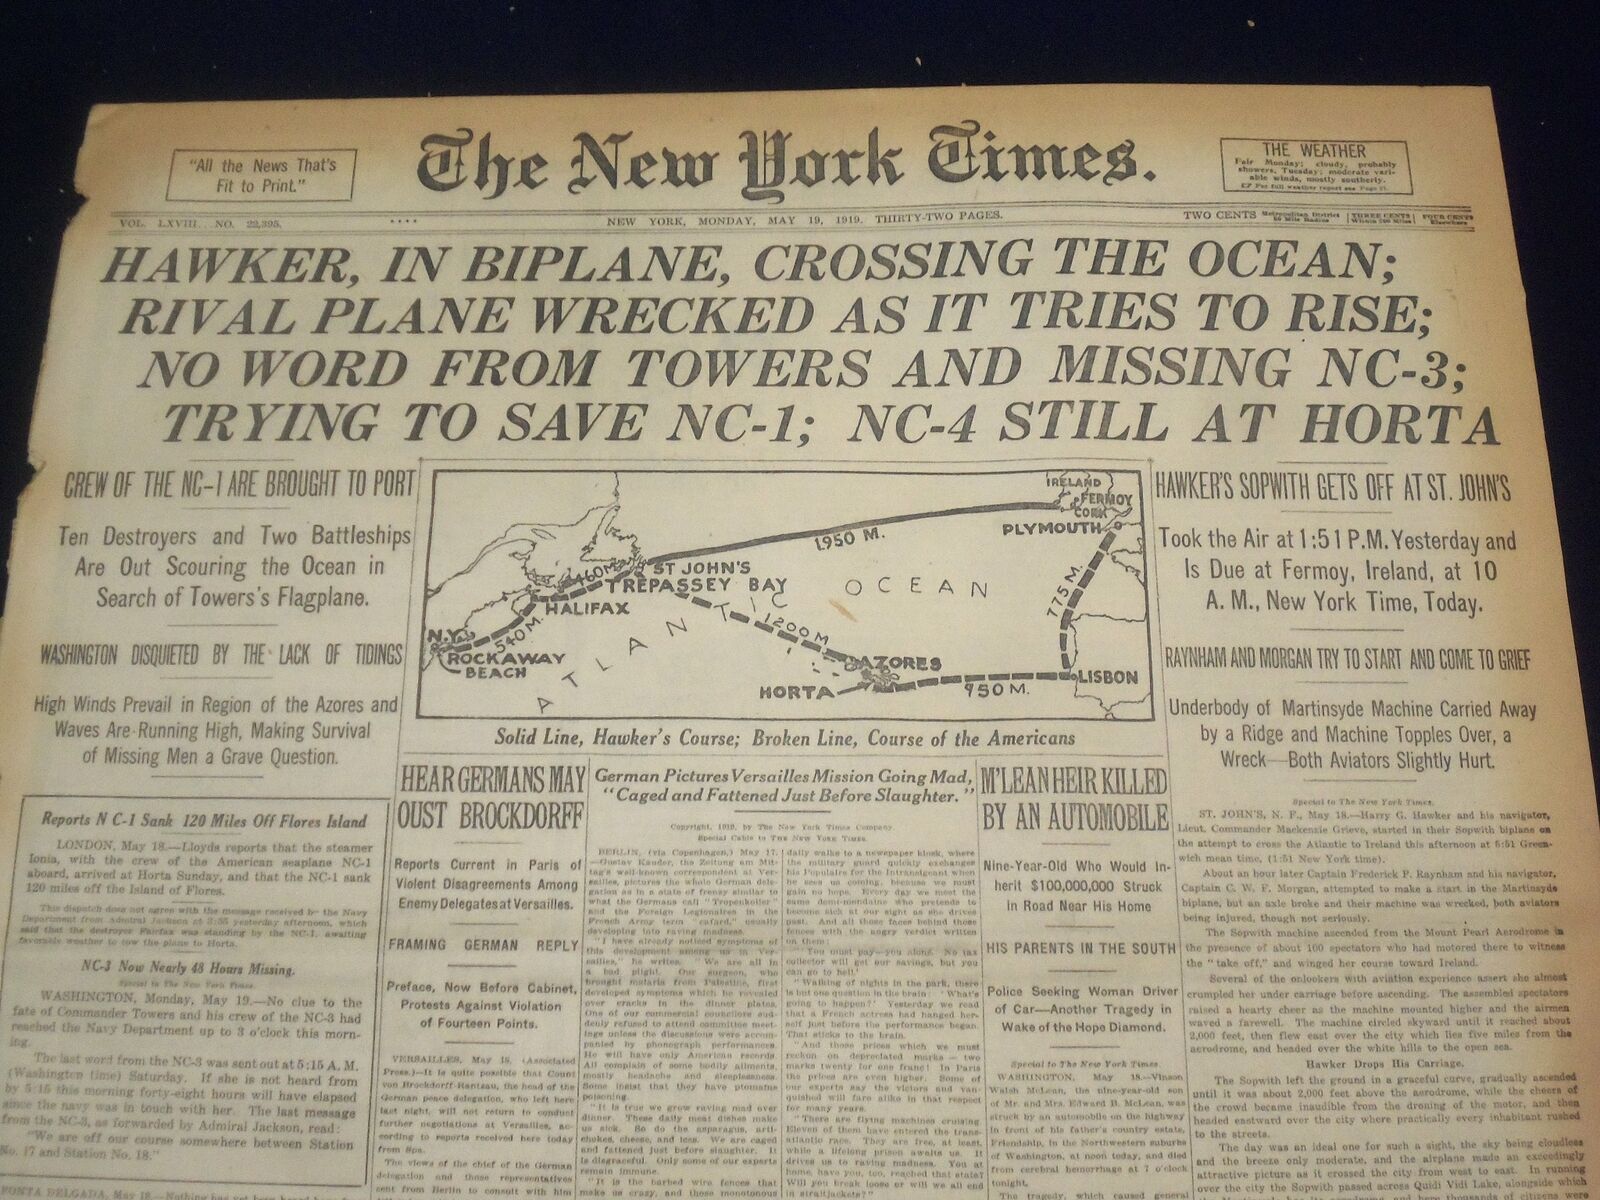 1919 MAY 19 NEW YORK TIMES - HAWKER IN BIPLANCE CROSSING THE OCEAN - NT 9252